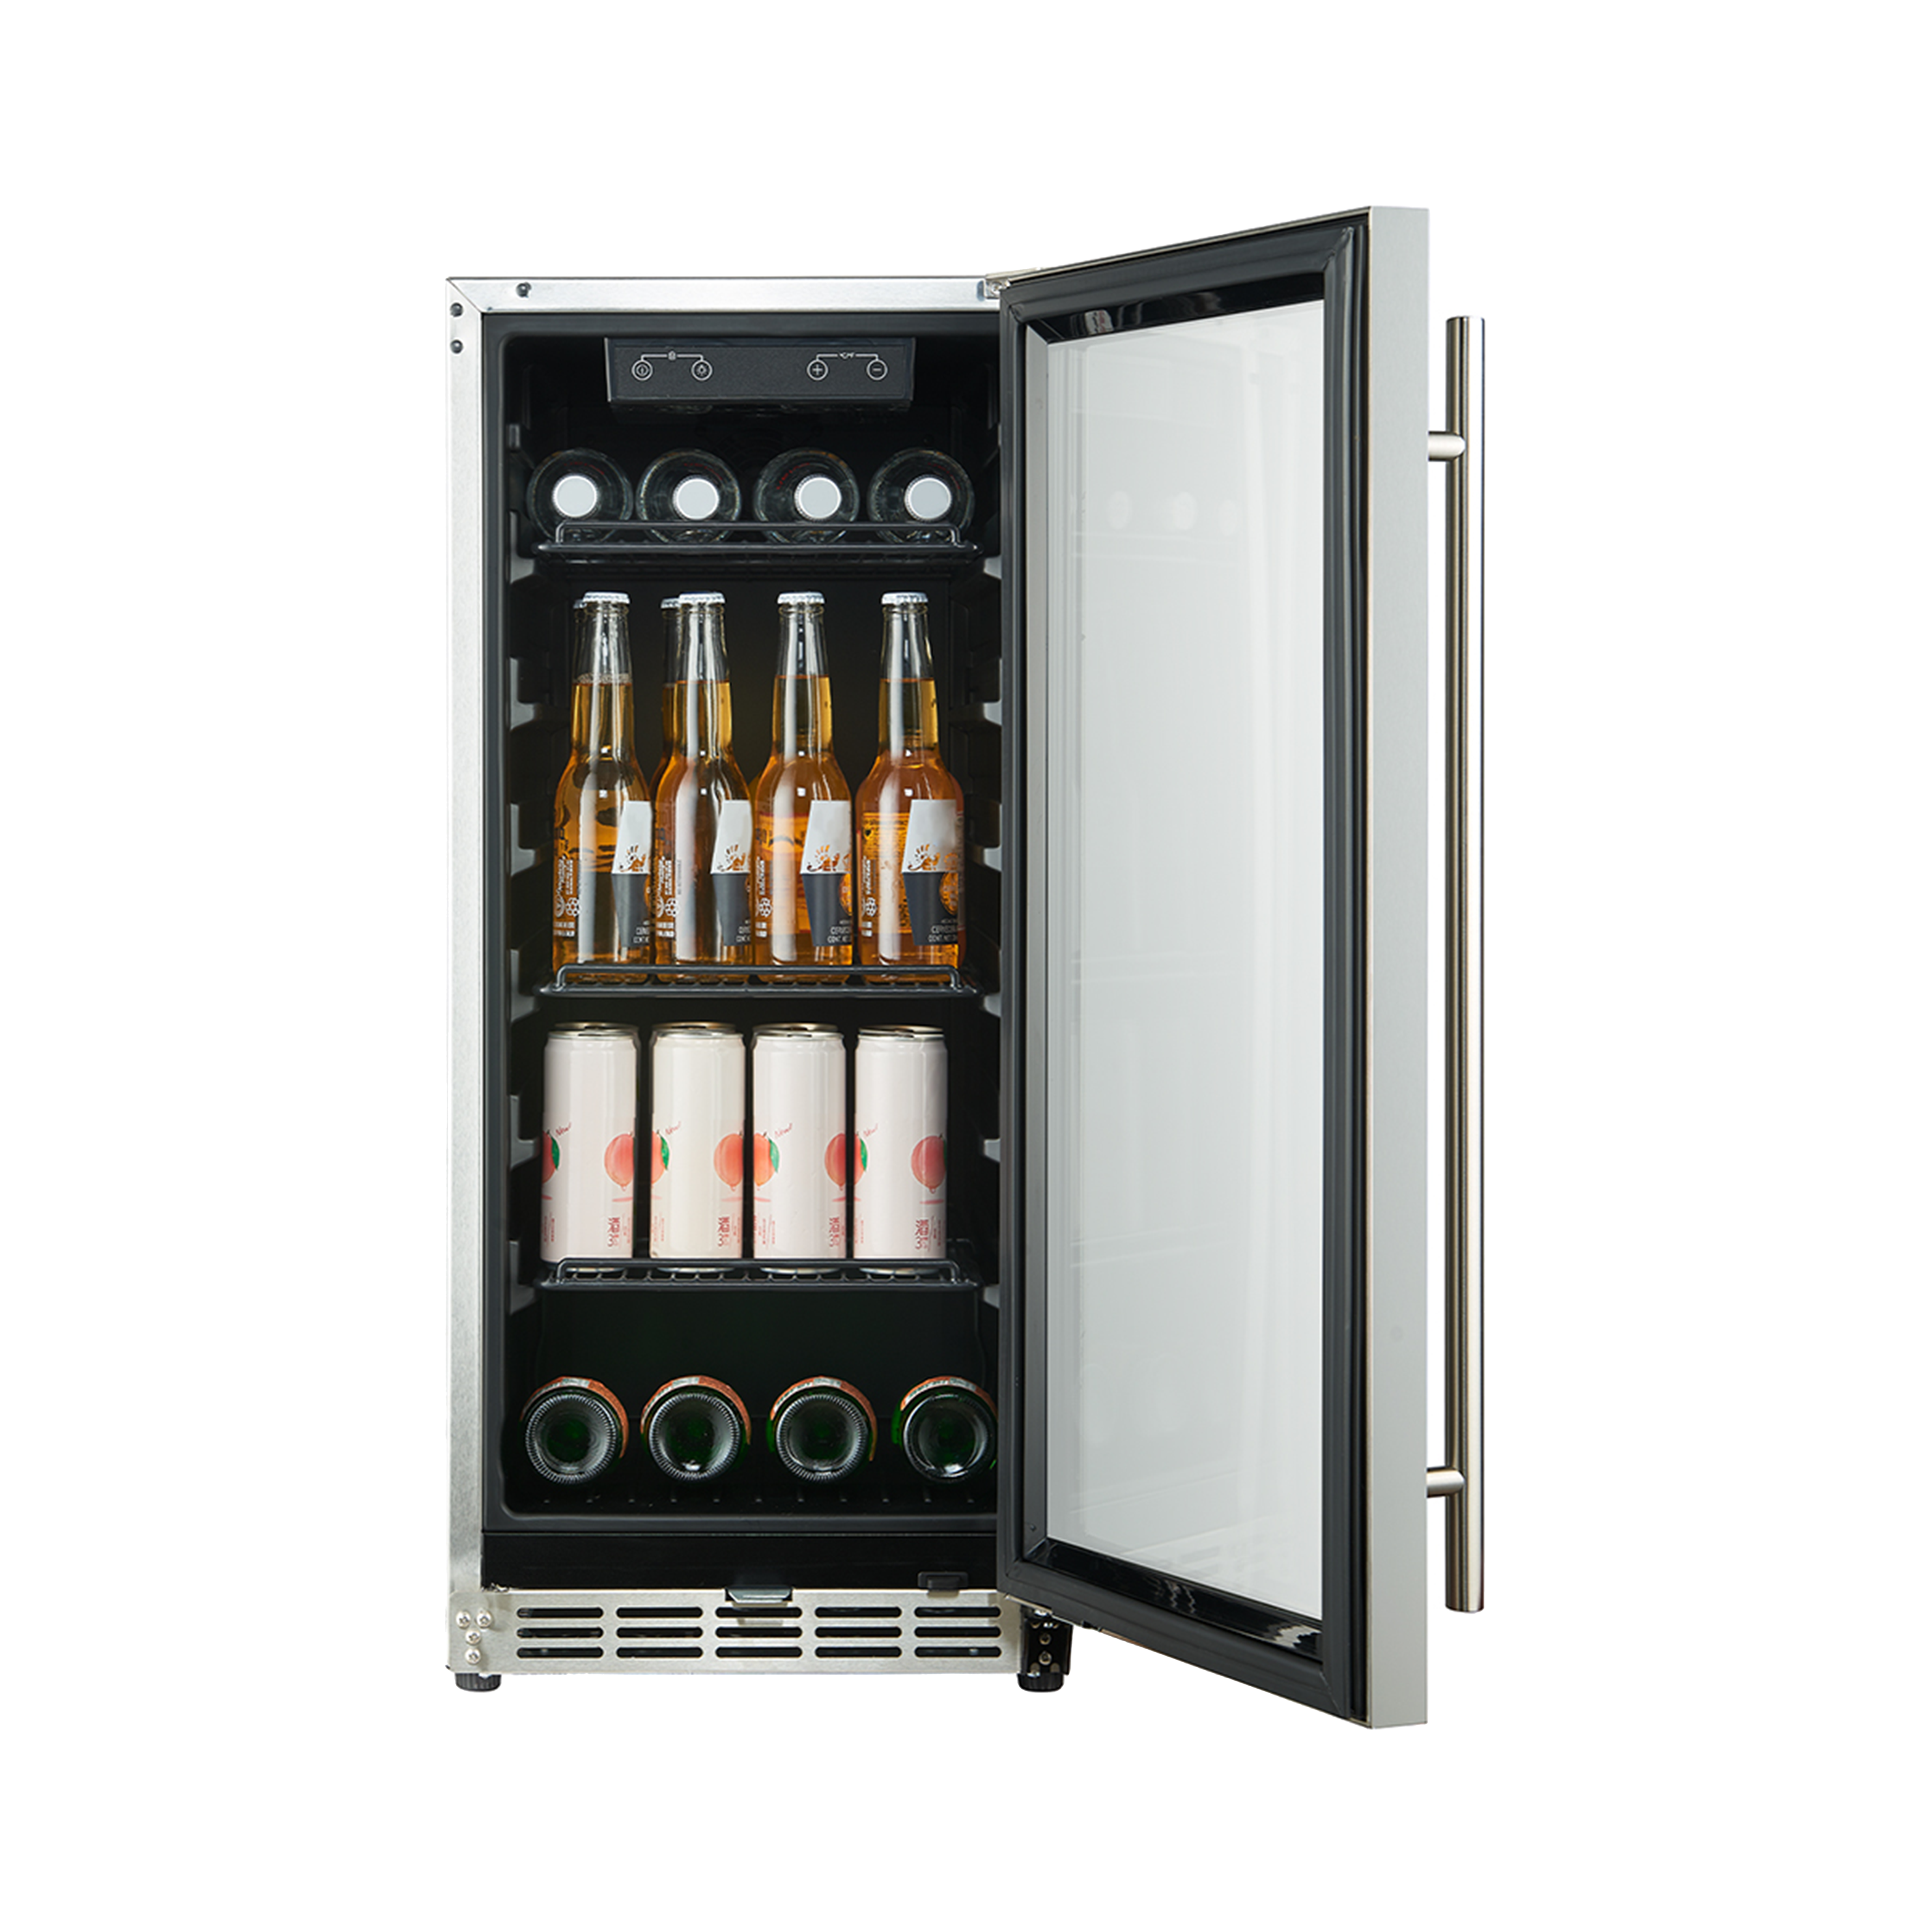 Front view of a 3.2 Cu Ft Compact Beverage Outdoor Refrigerator 96 cans with the door open, showcasing three shelves interior space full of beverage bottles and a digital temperature control panel